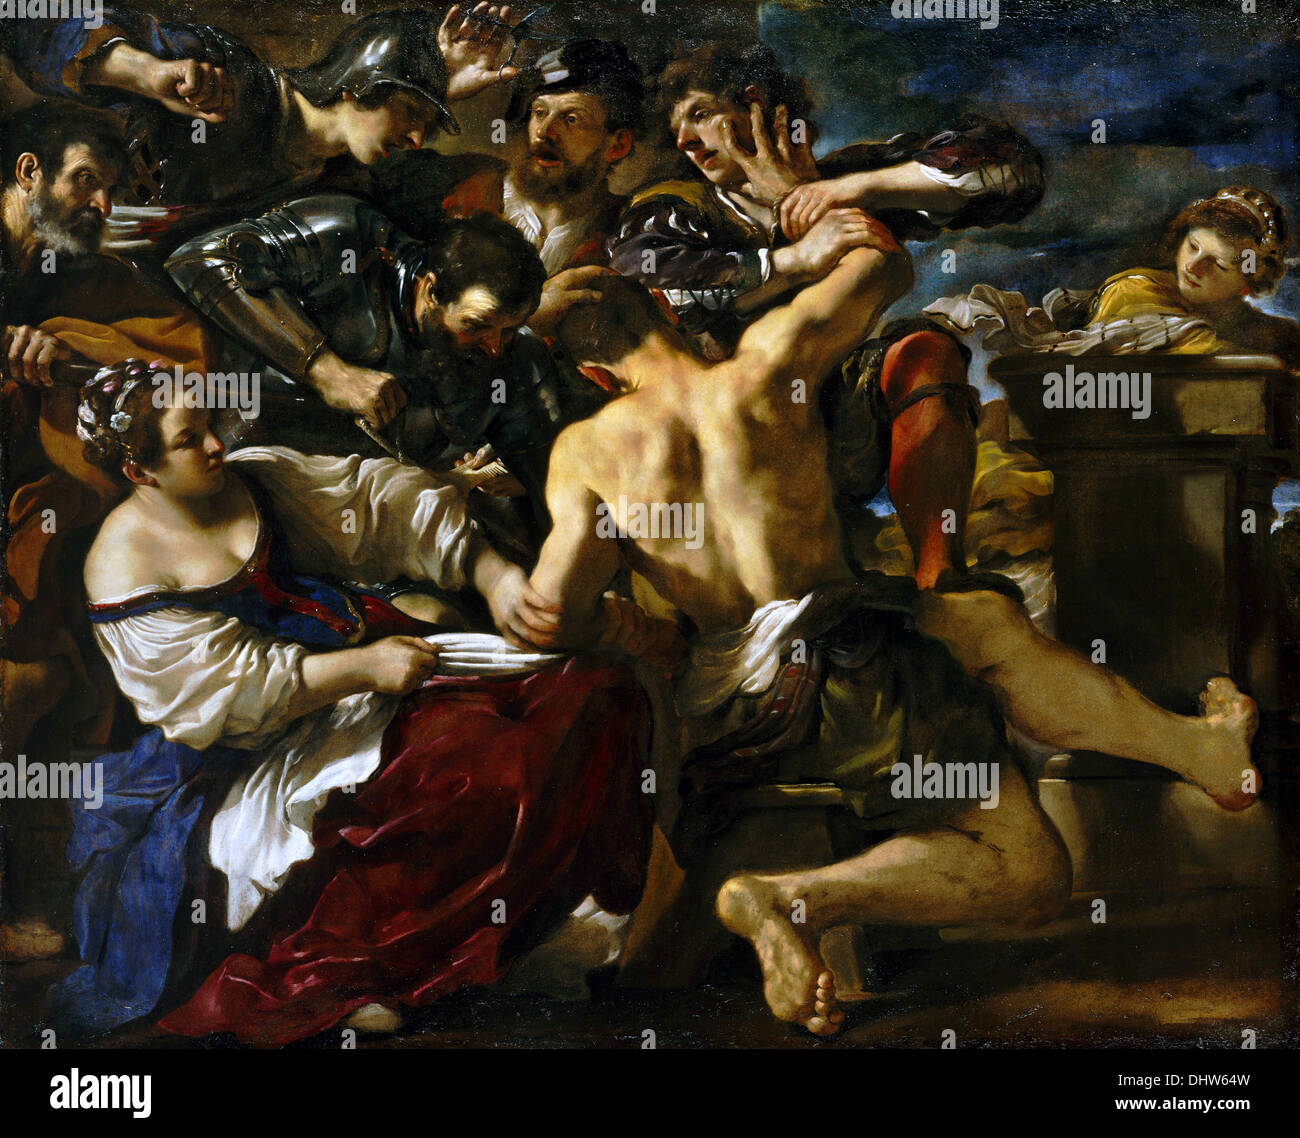 Samson Captured by the Philistines - by Guercino, 1619 Stock Photo